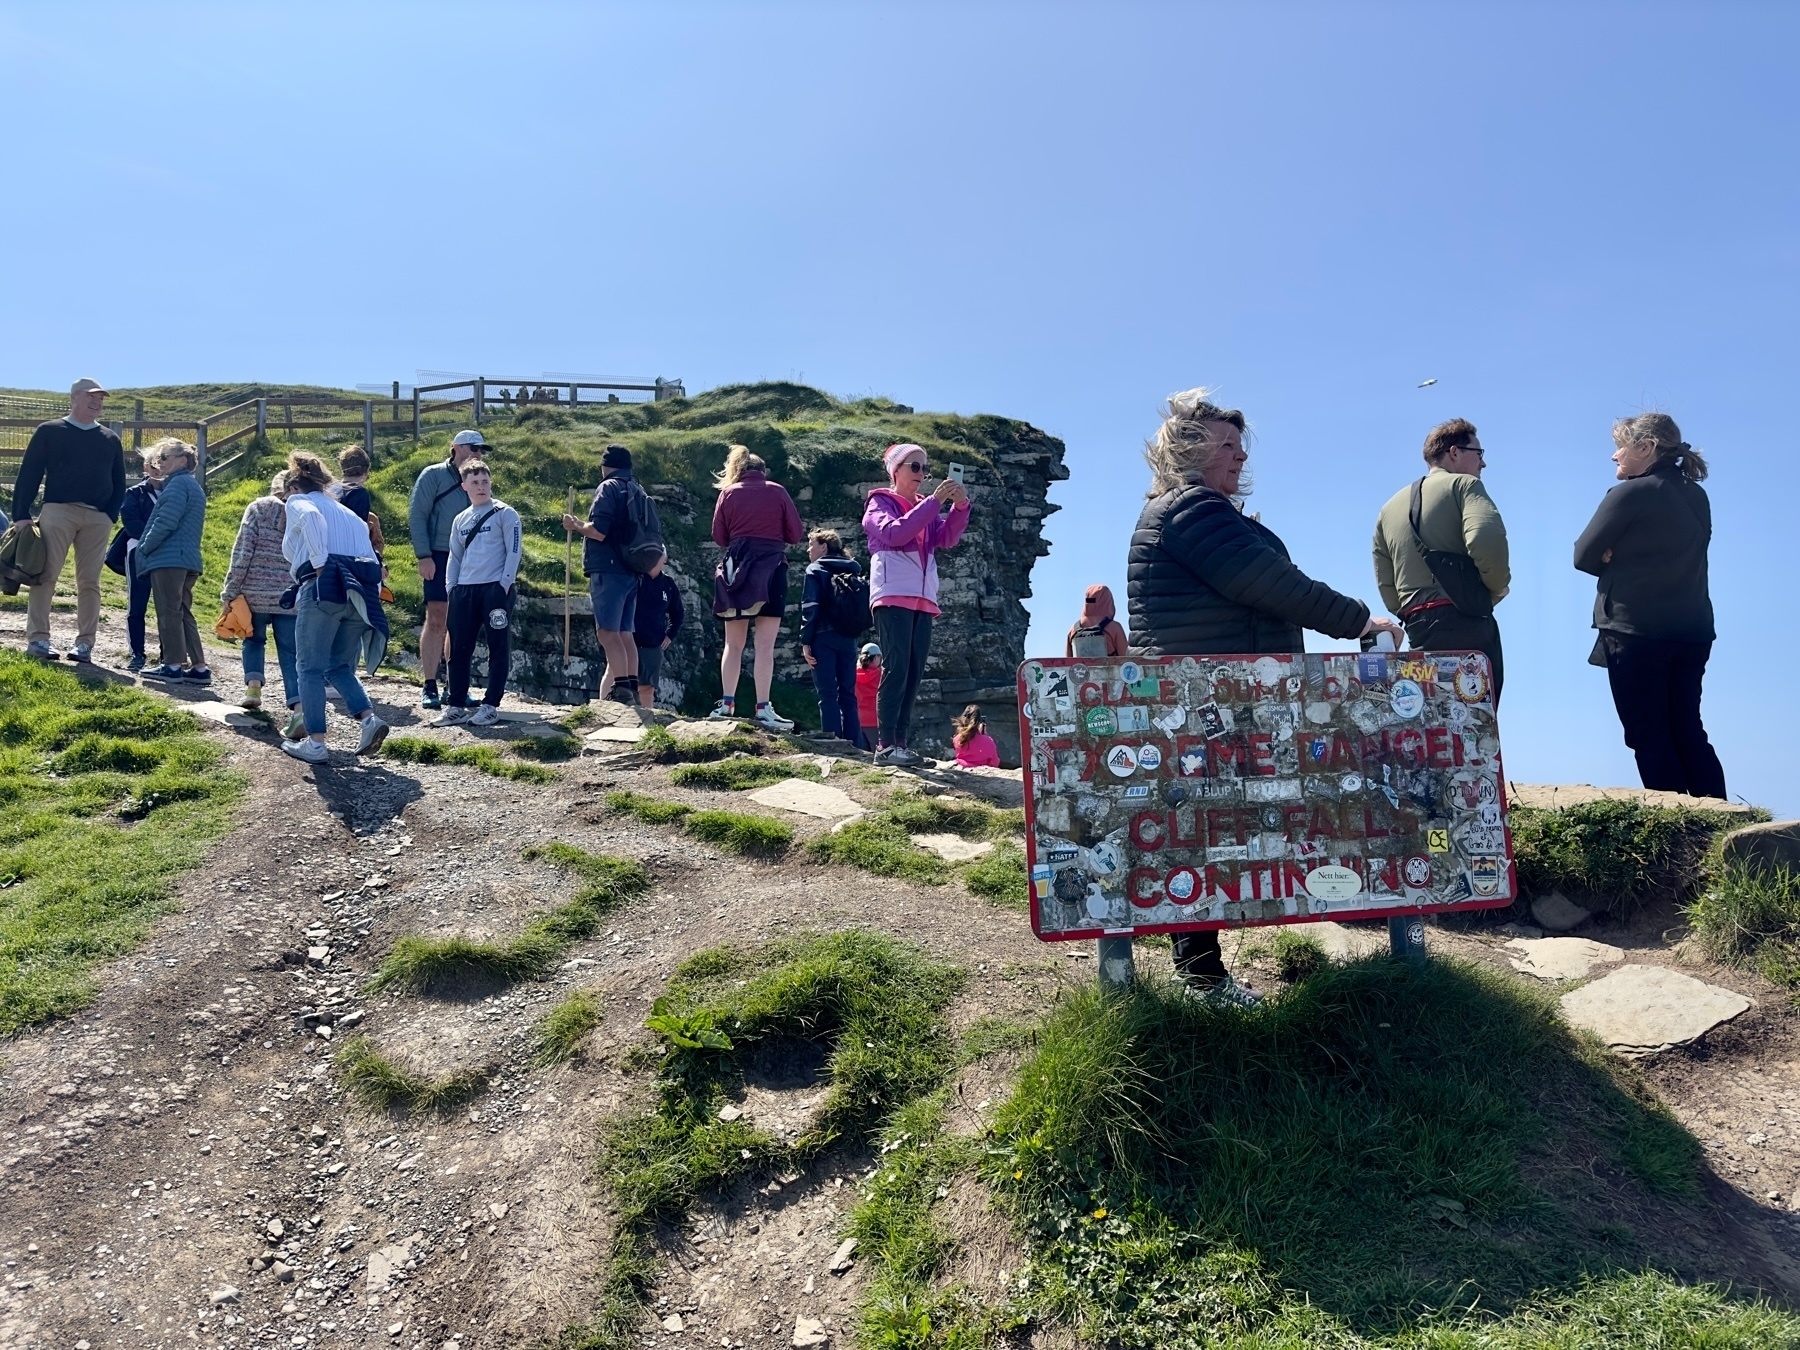 Auto-generated description: A group of people are gathered outdoors on a rocky path near a cliff, with one person holding a sign warning about dangers.